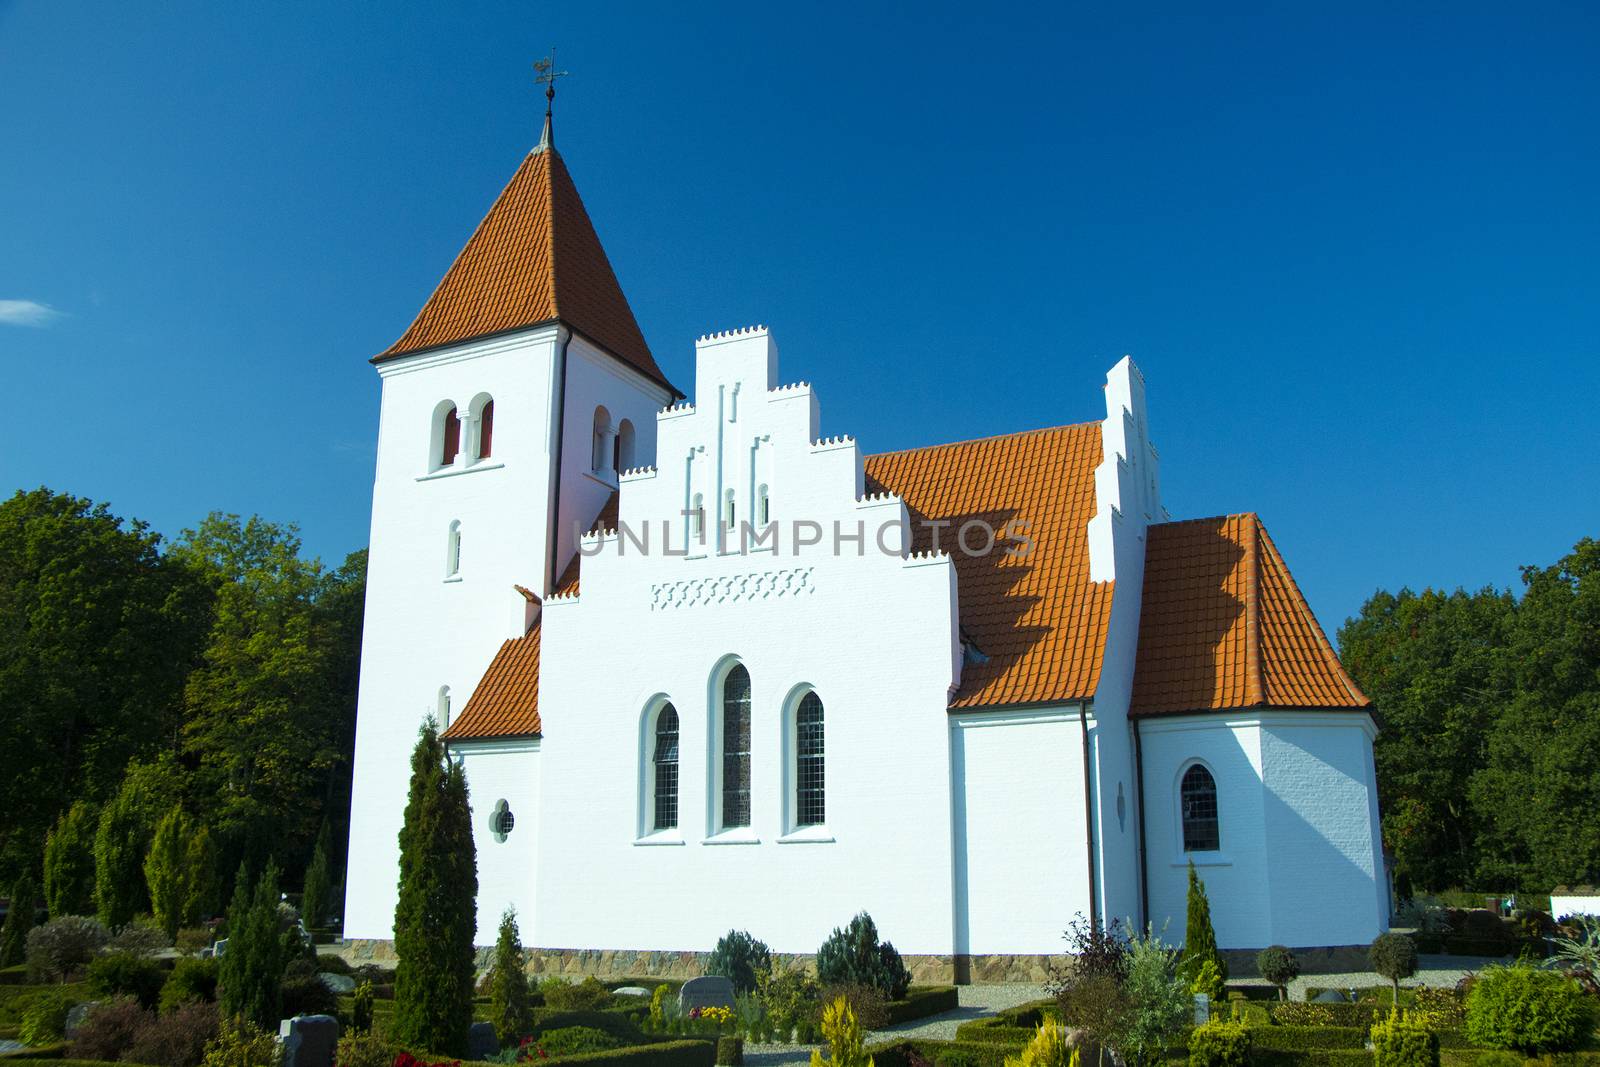 White church with orange tiles surrounded by graveyard with plants and a blue sky on a sunny day.